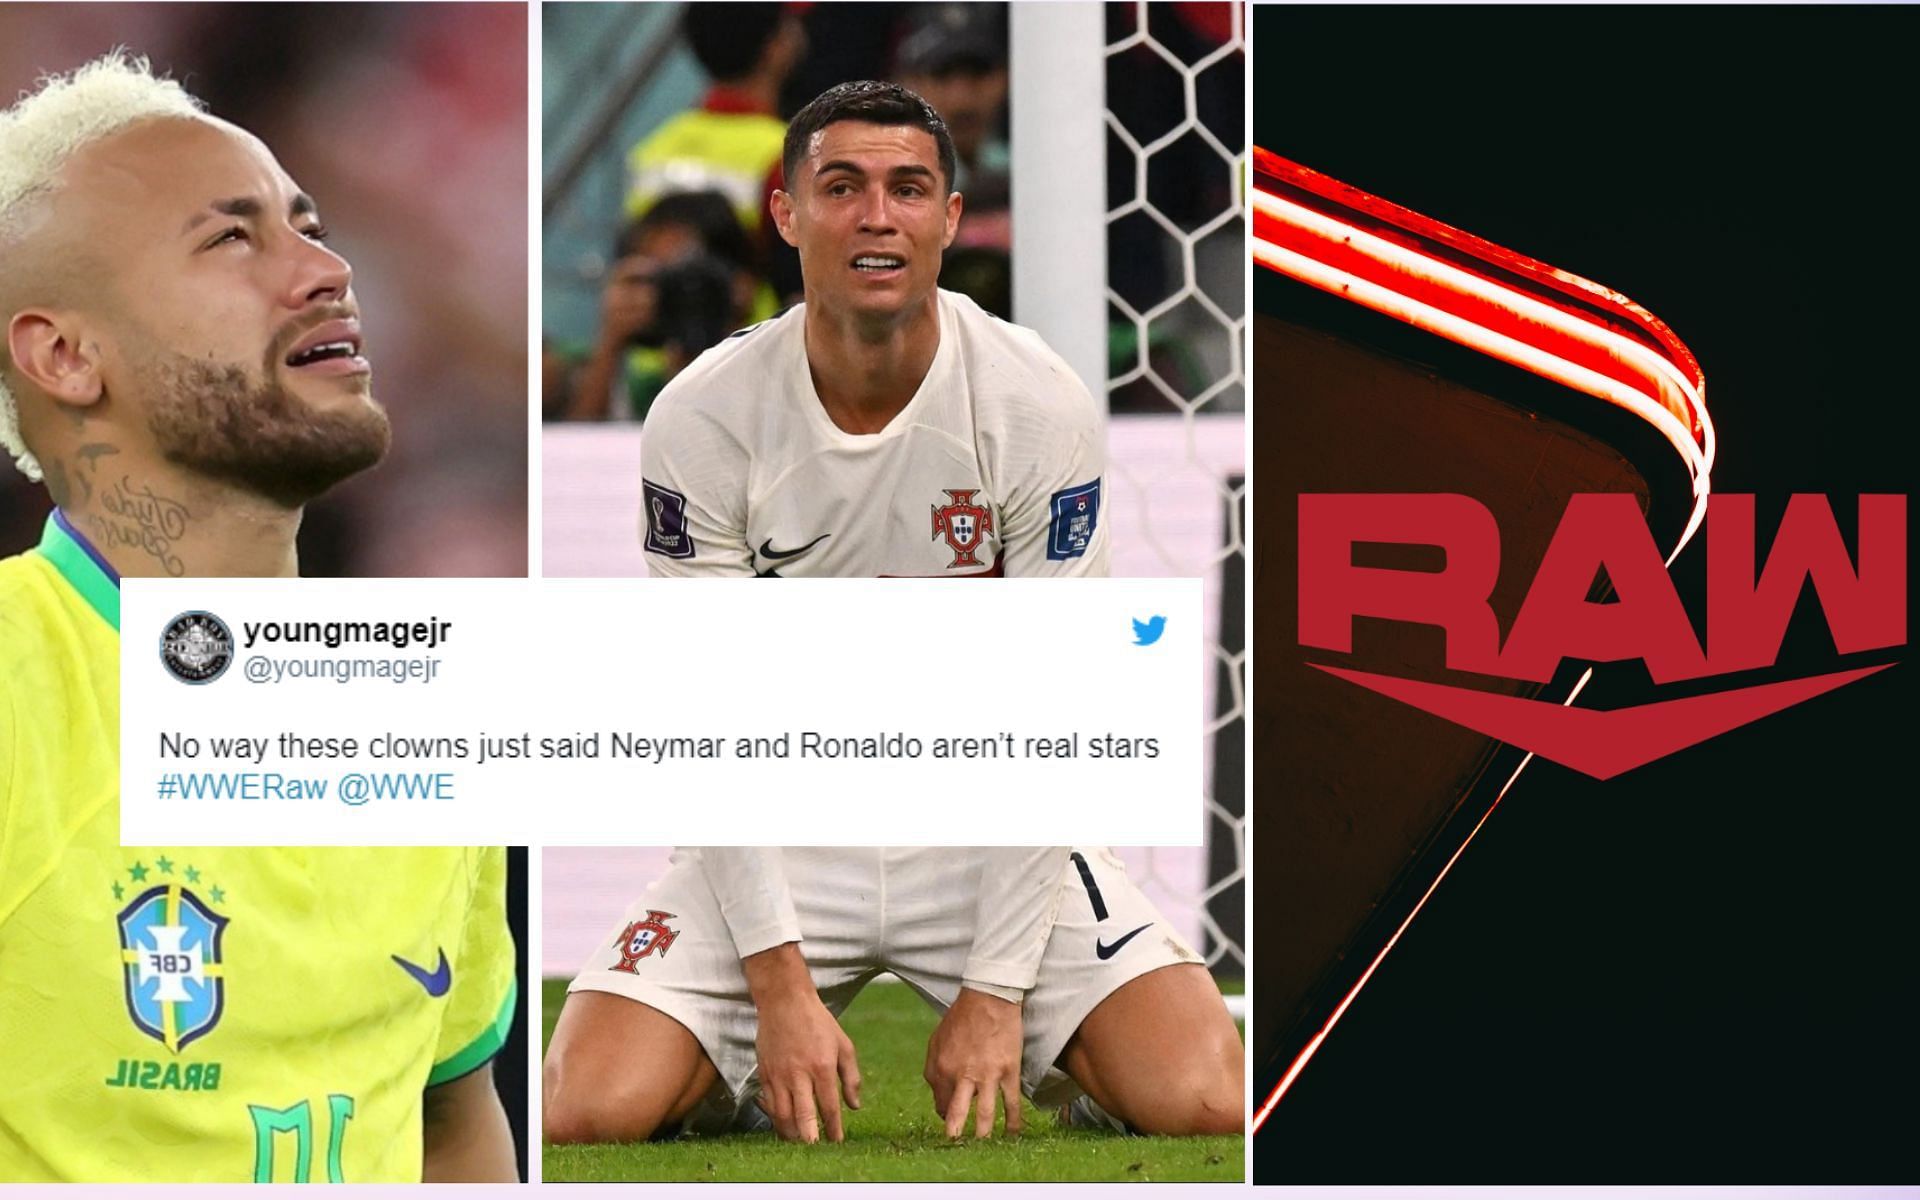 Corey Graves took a dig at two of the three biggest football/soccer stars in the world